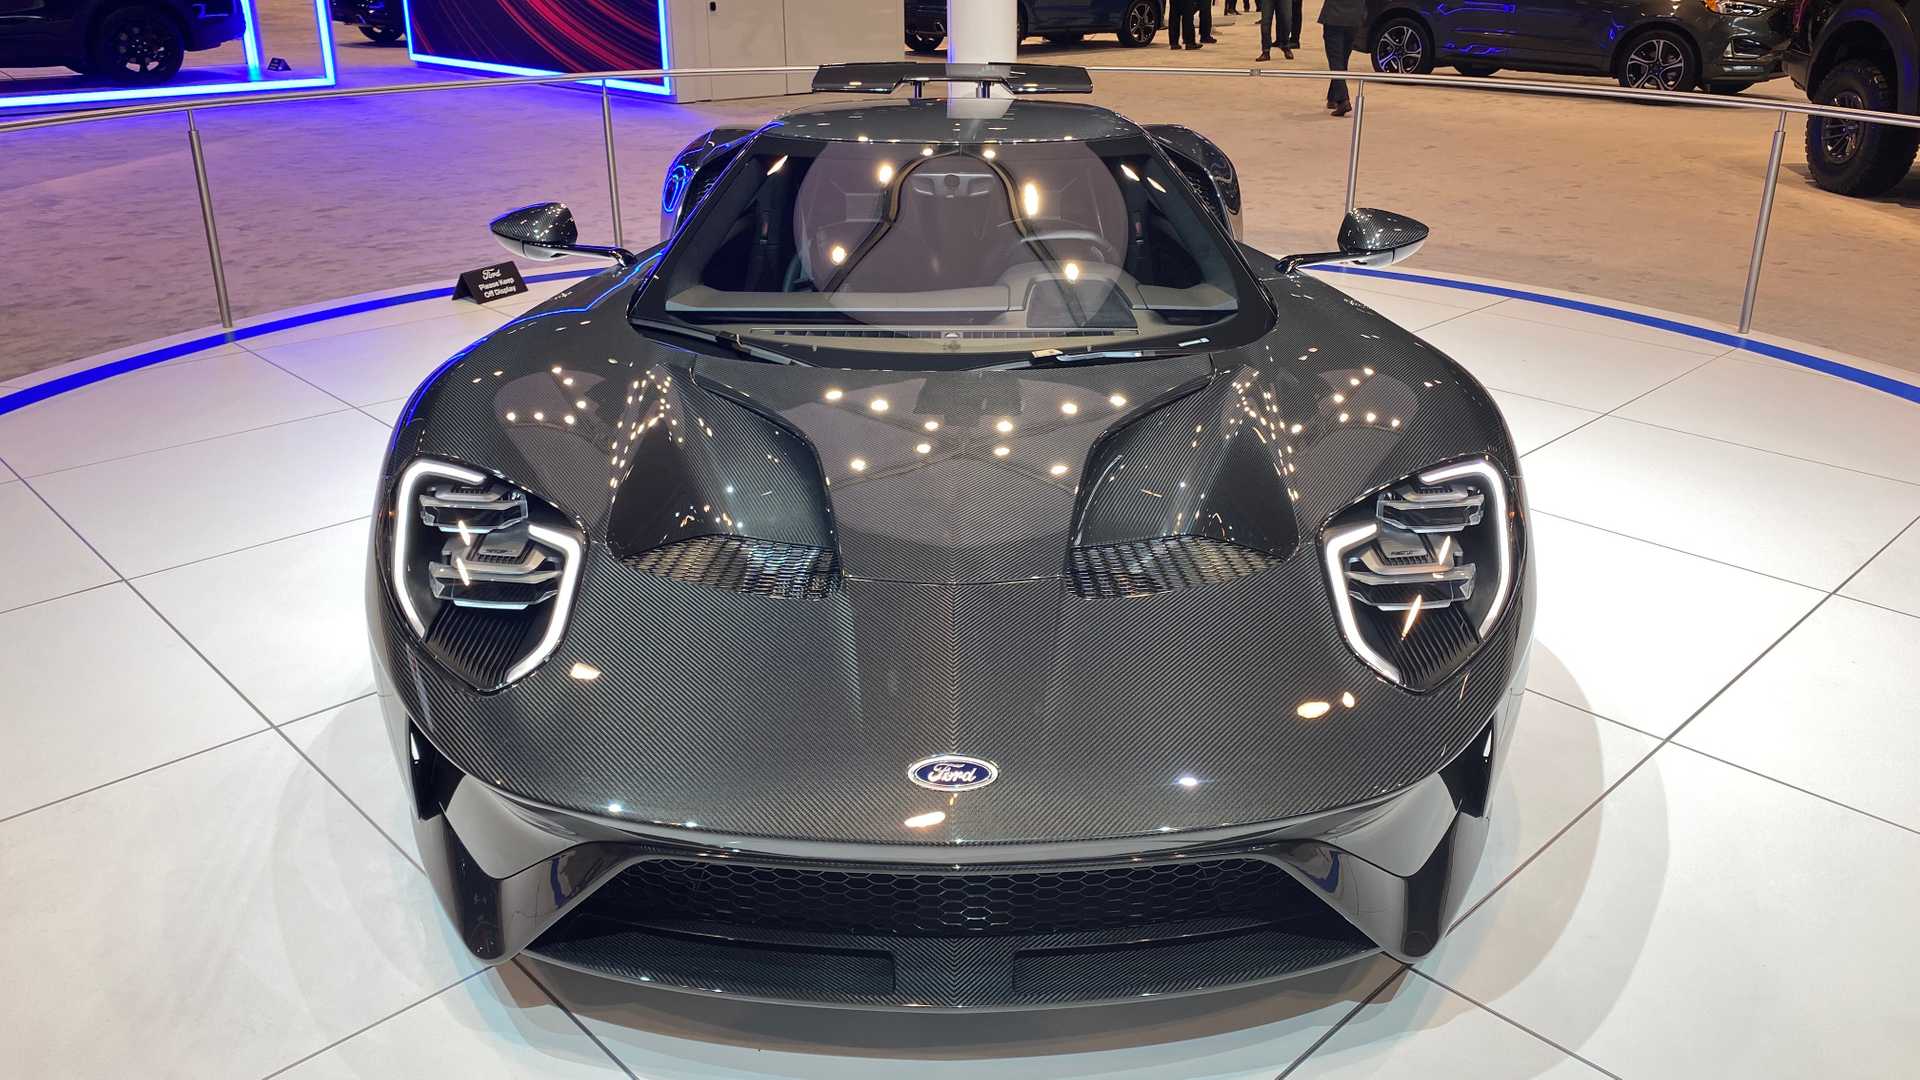 Ford Gt Liquid Carbon Takes 3x Longer To Build Than Regular